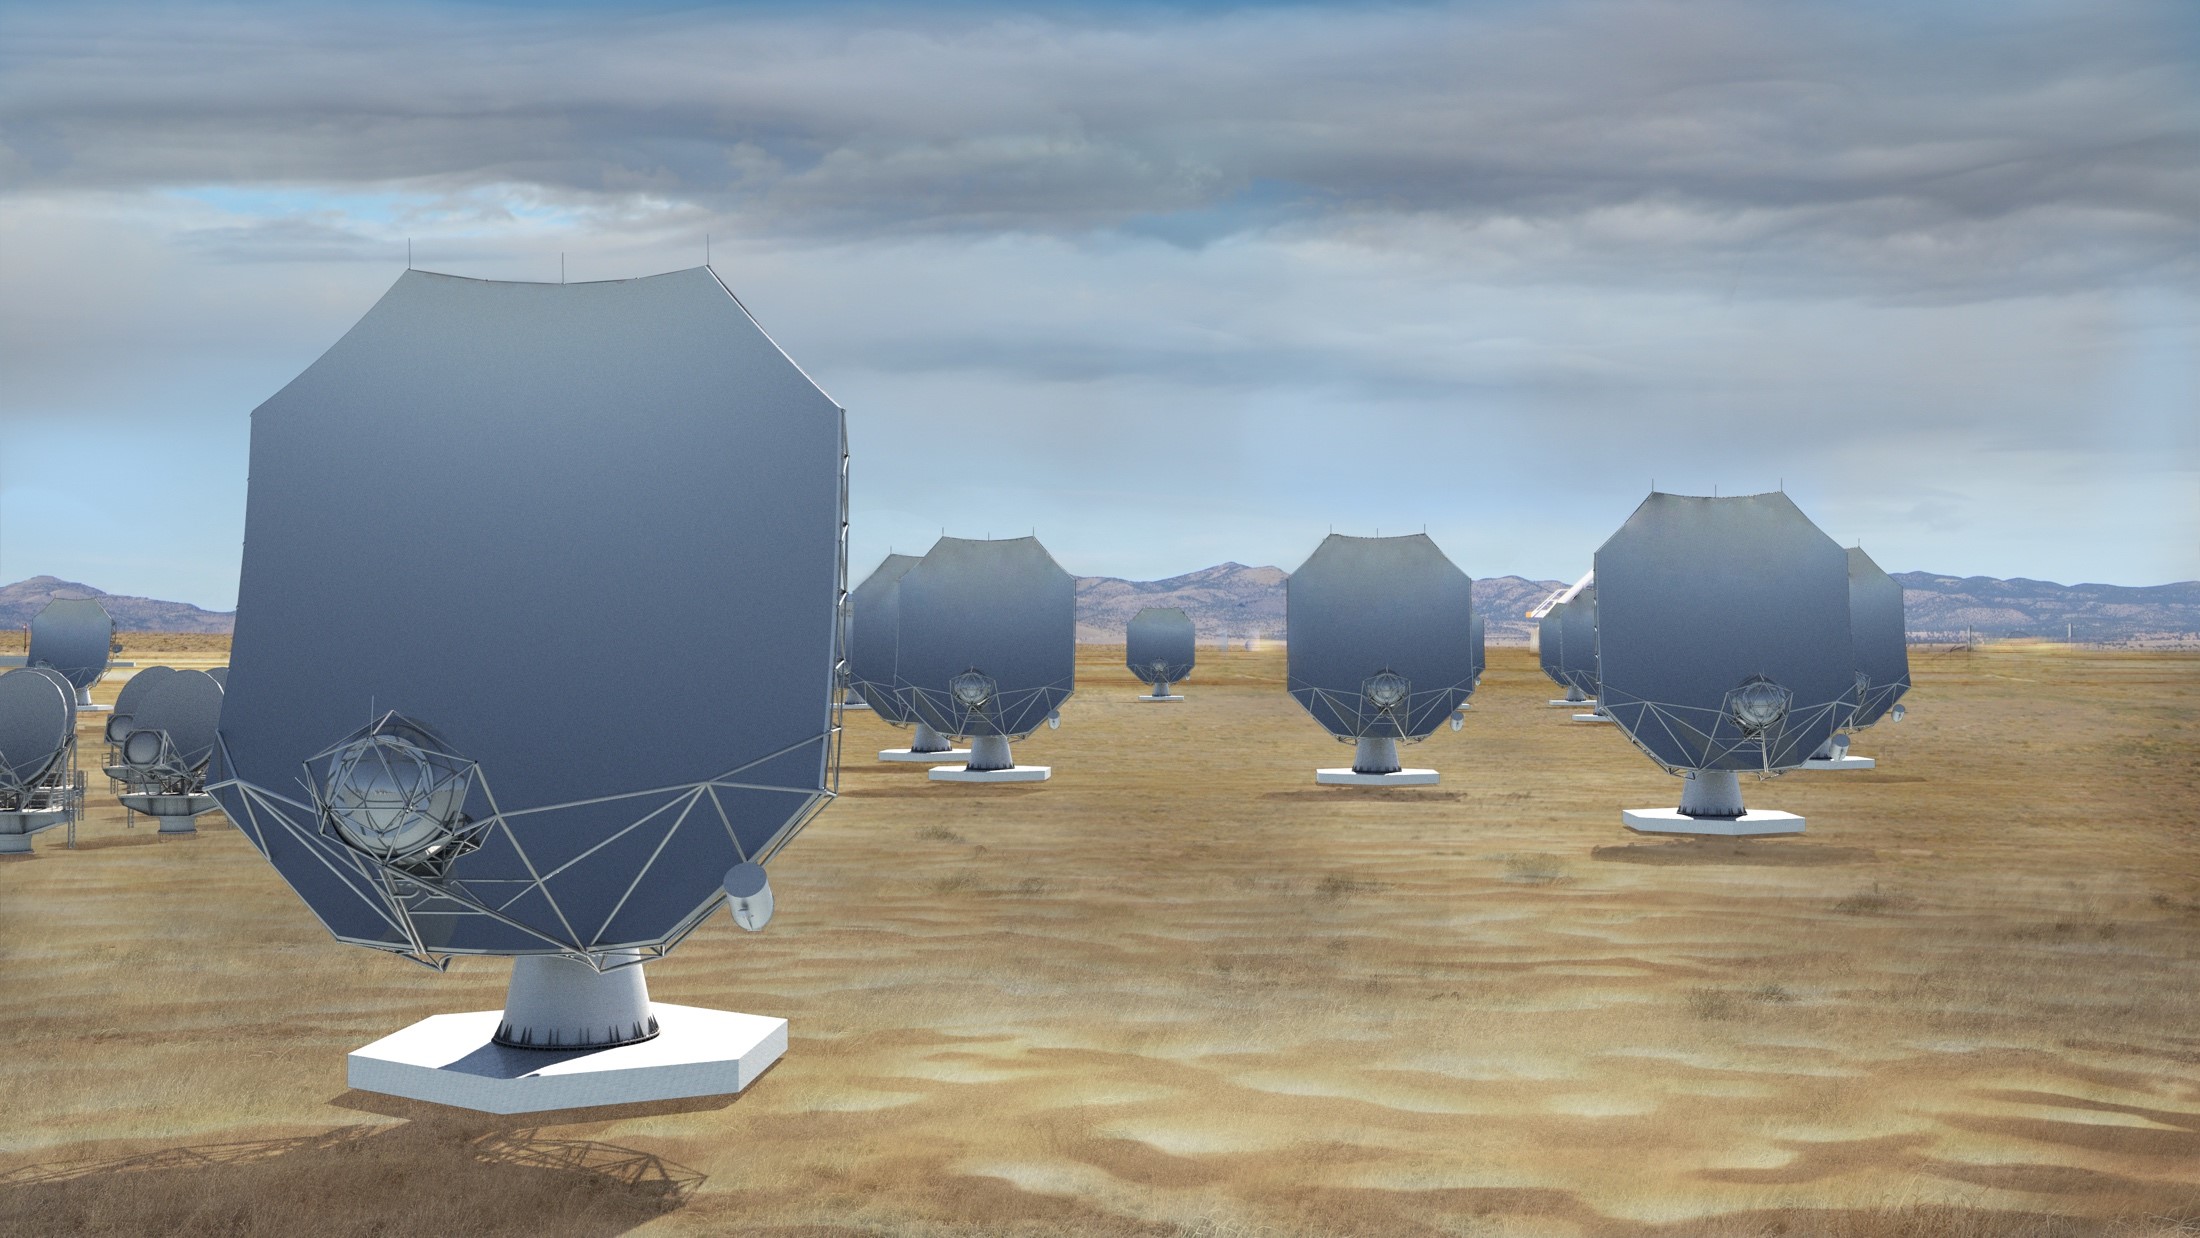 An artist's impression of antennas of the next generation Very Large Array (ngVLA).